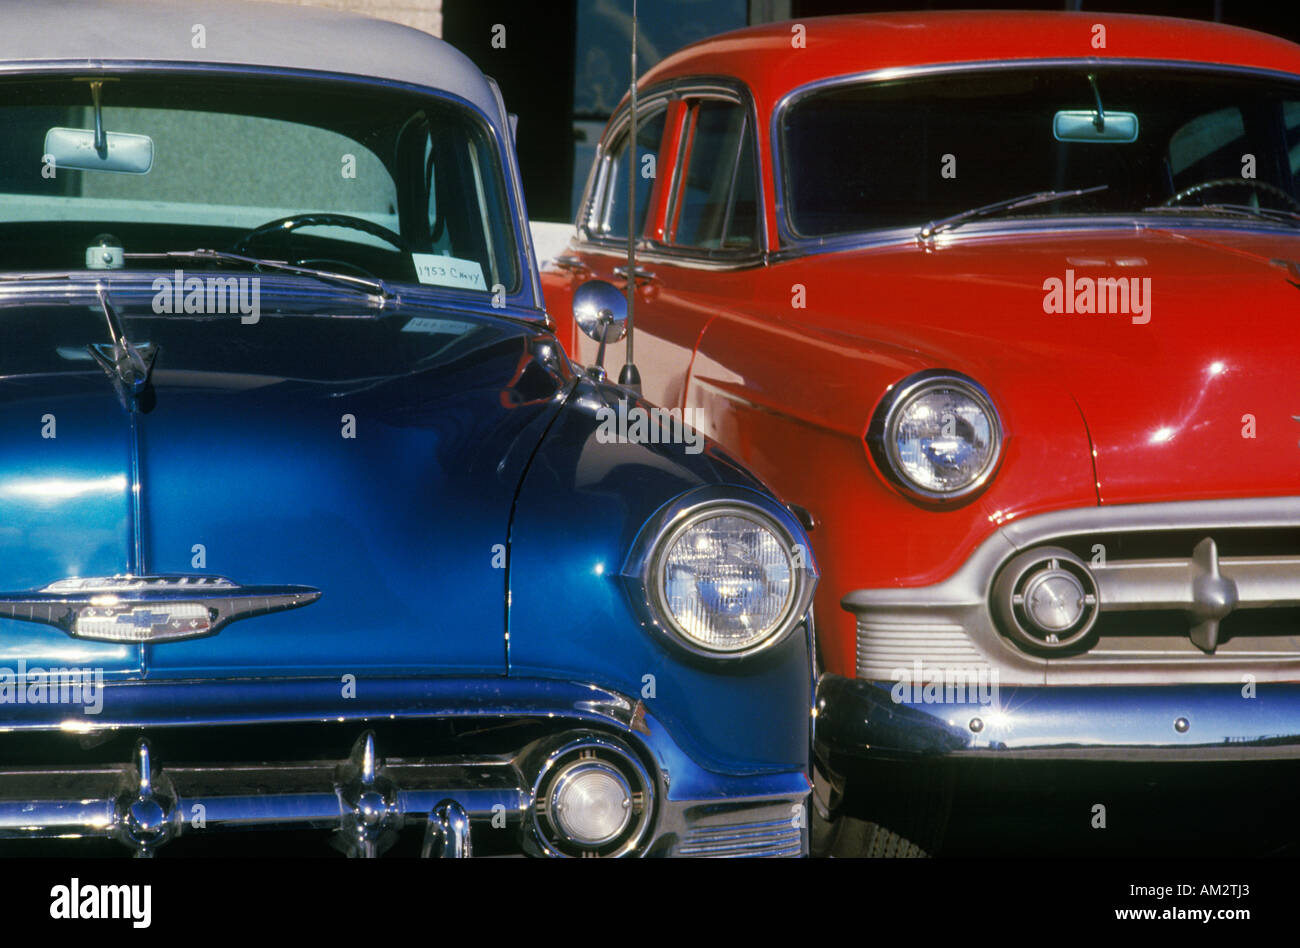 A blue and red antique car in Hollywood California Stock Photo